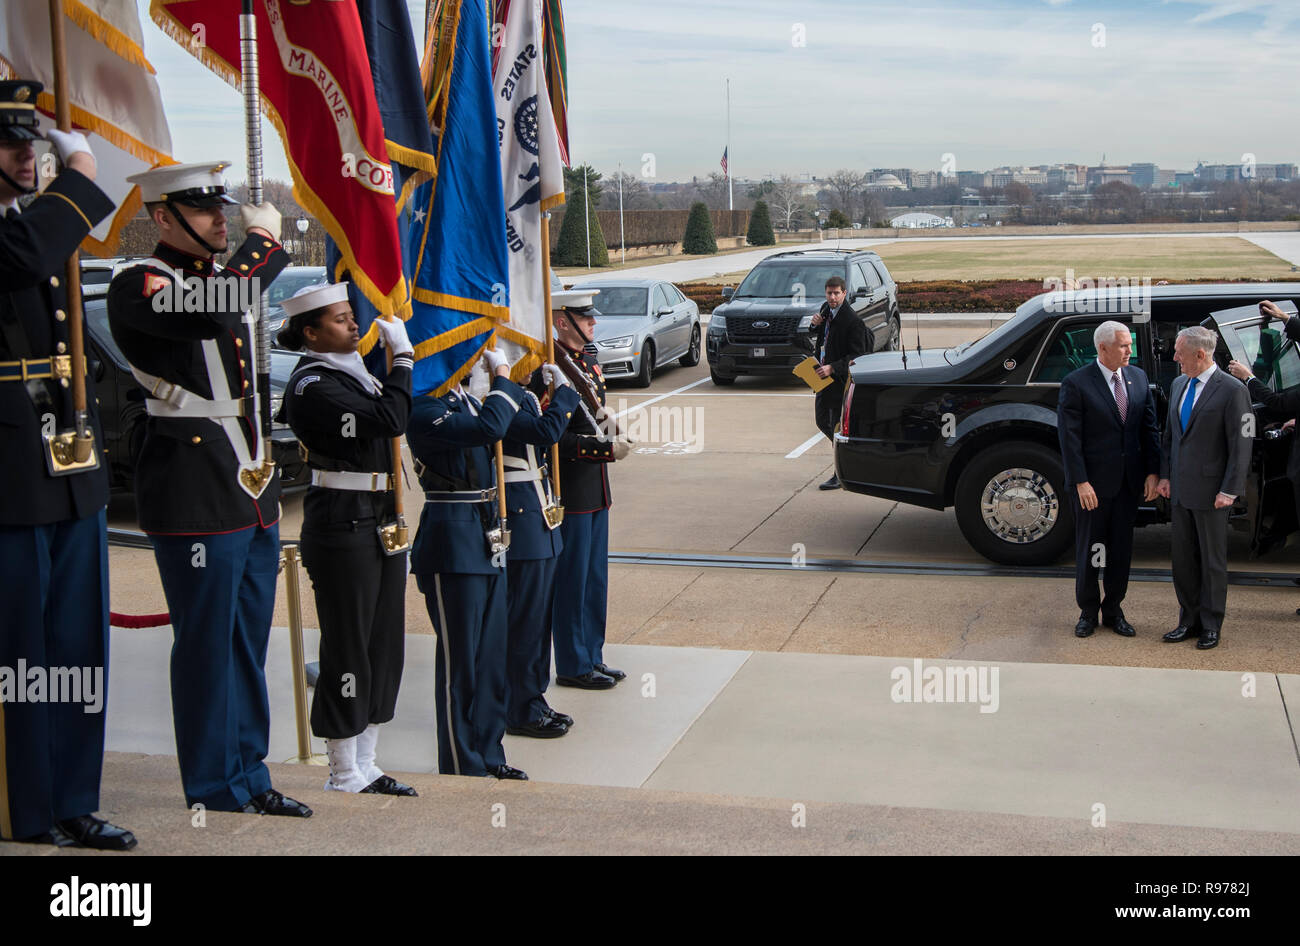 U.S. Vice President Mike Pence is greeted by U.S. Secretary of Defense James N. Mattis as he arrives at the Pentagon, Dec. 19, 2018. (DoD photo by Tech Sgt. Vernon Young Jr.) Stock Photo